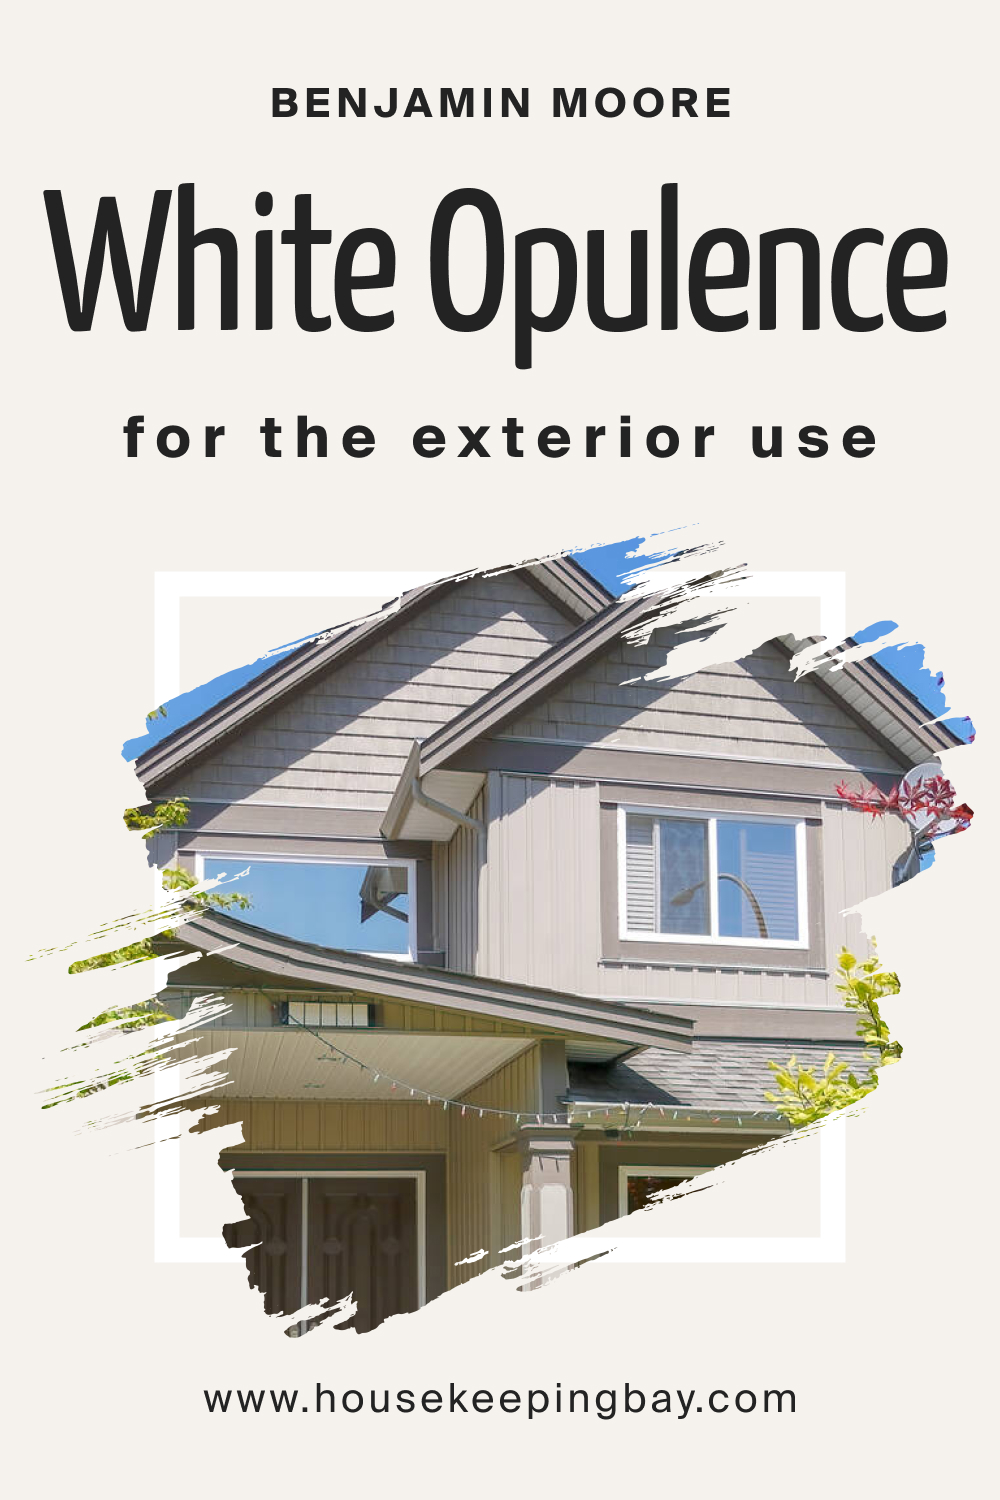 Benjamin Moore. White Opulence OC 69 for the Exterior Use